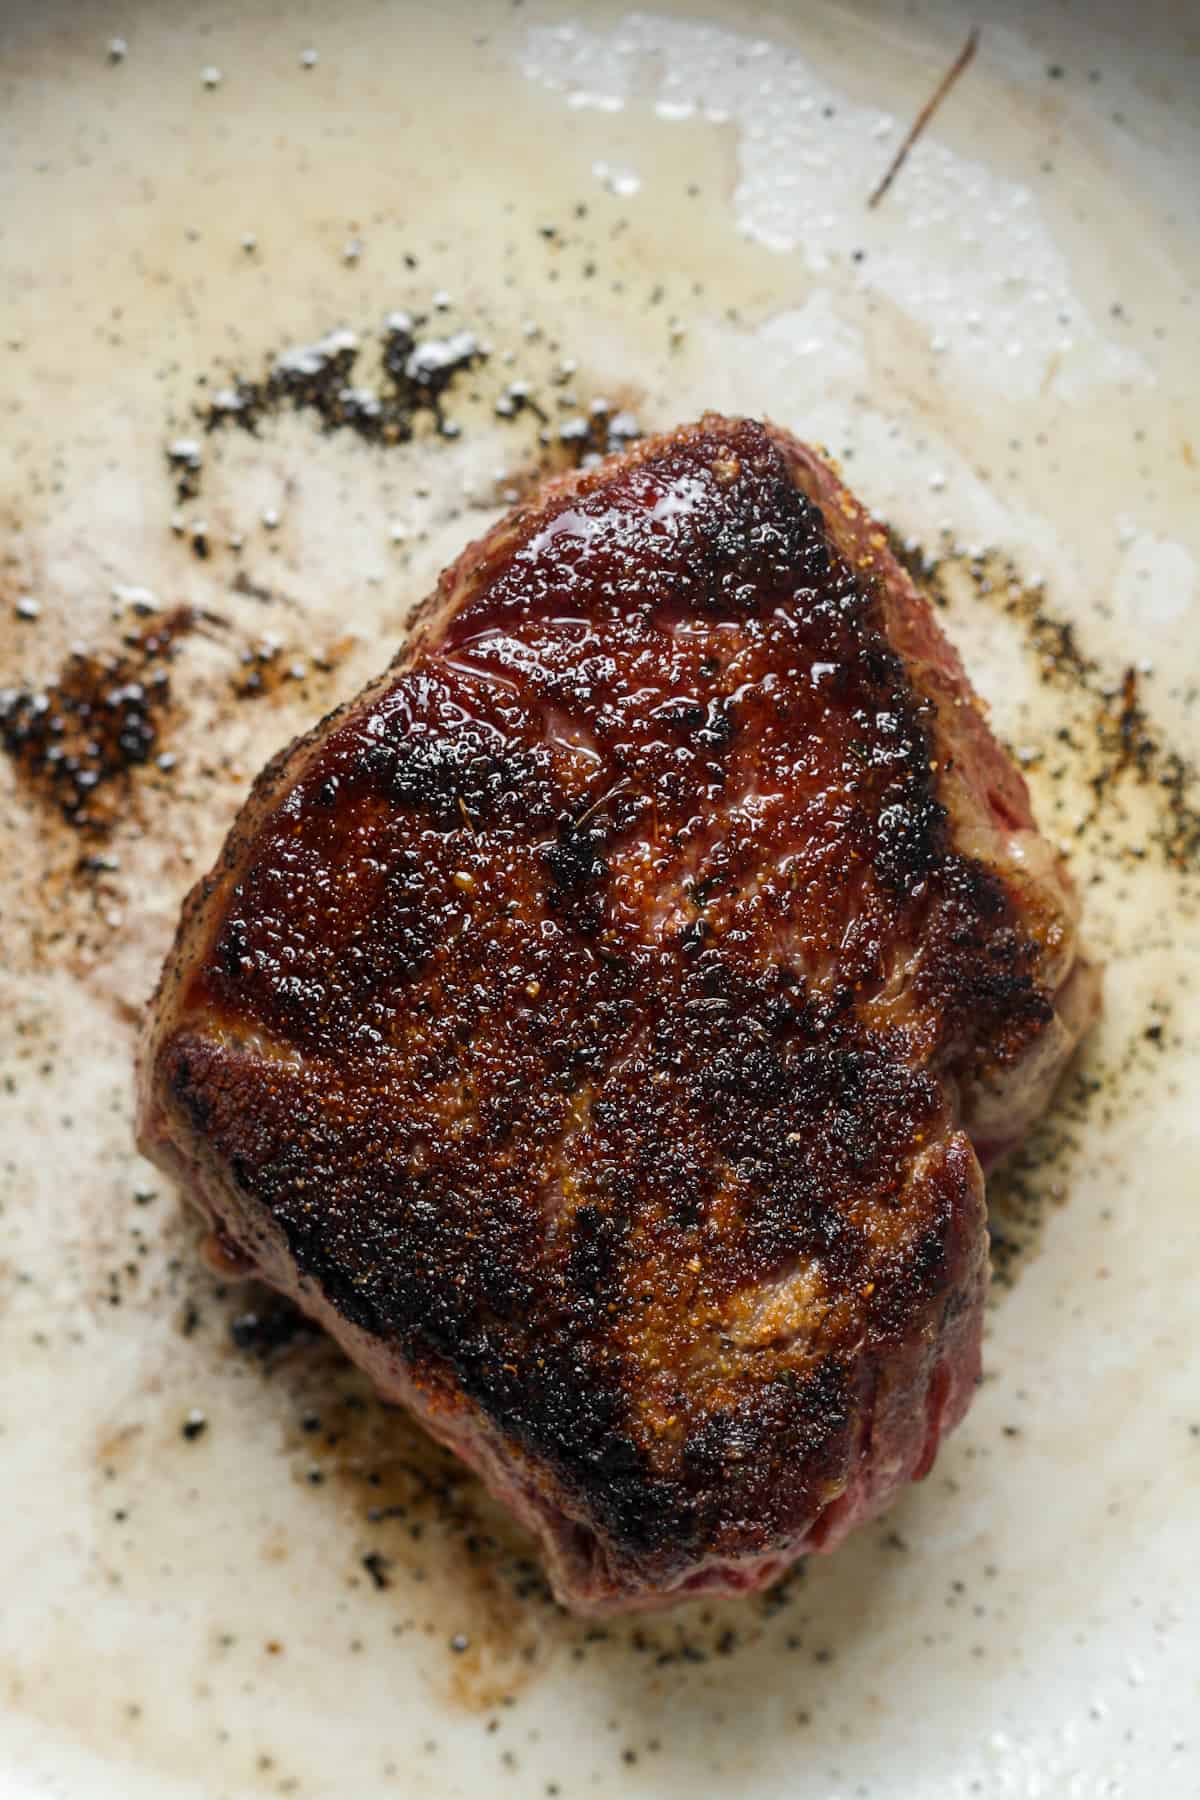 Thick steak with seasoning.